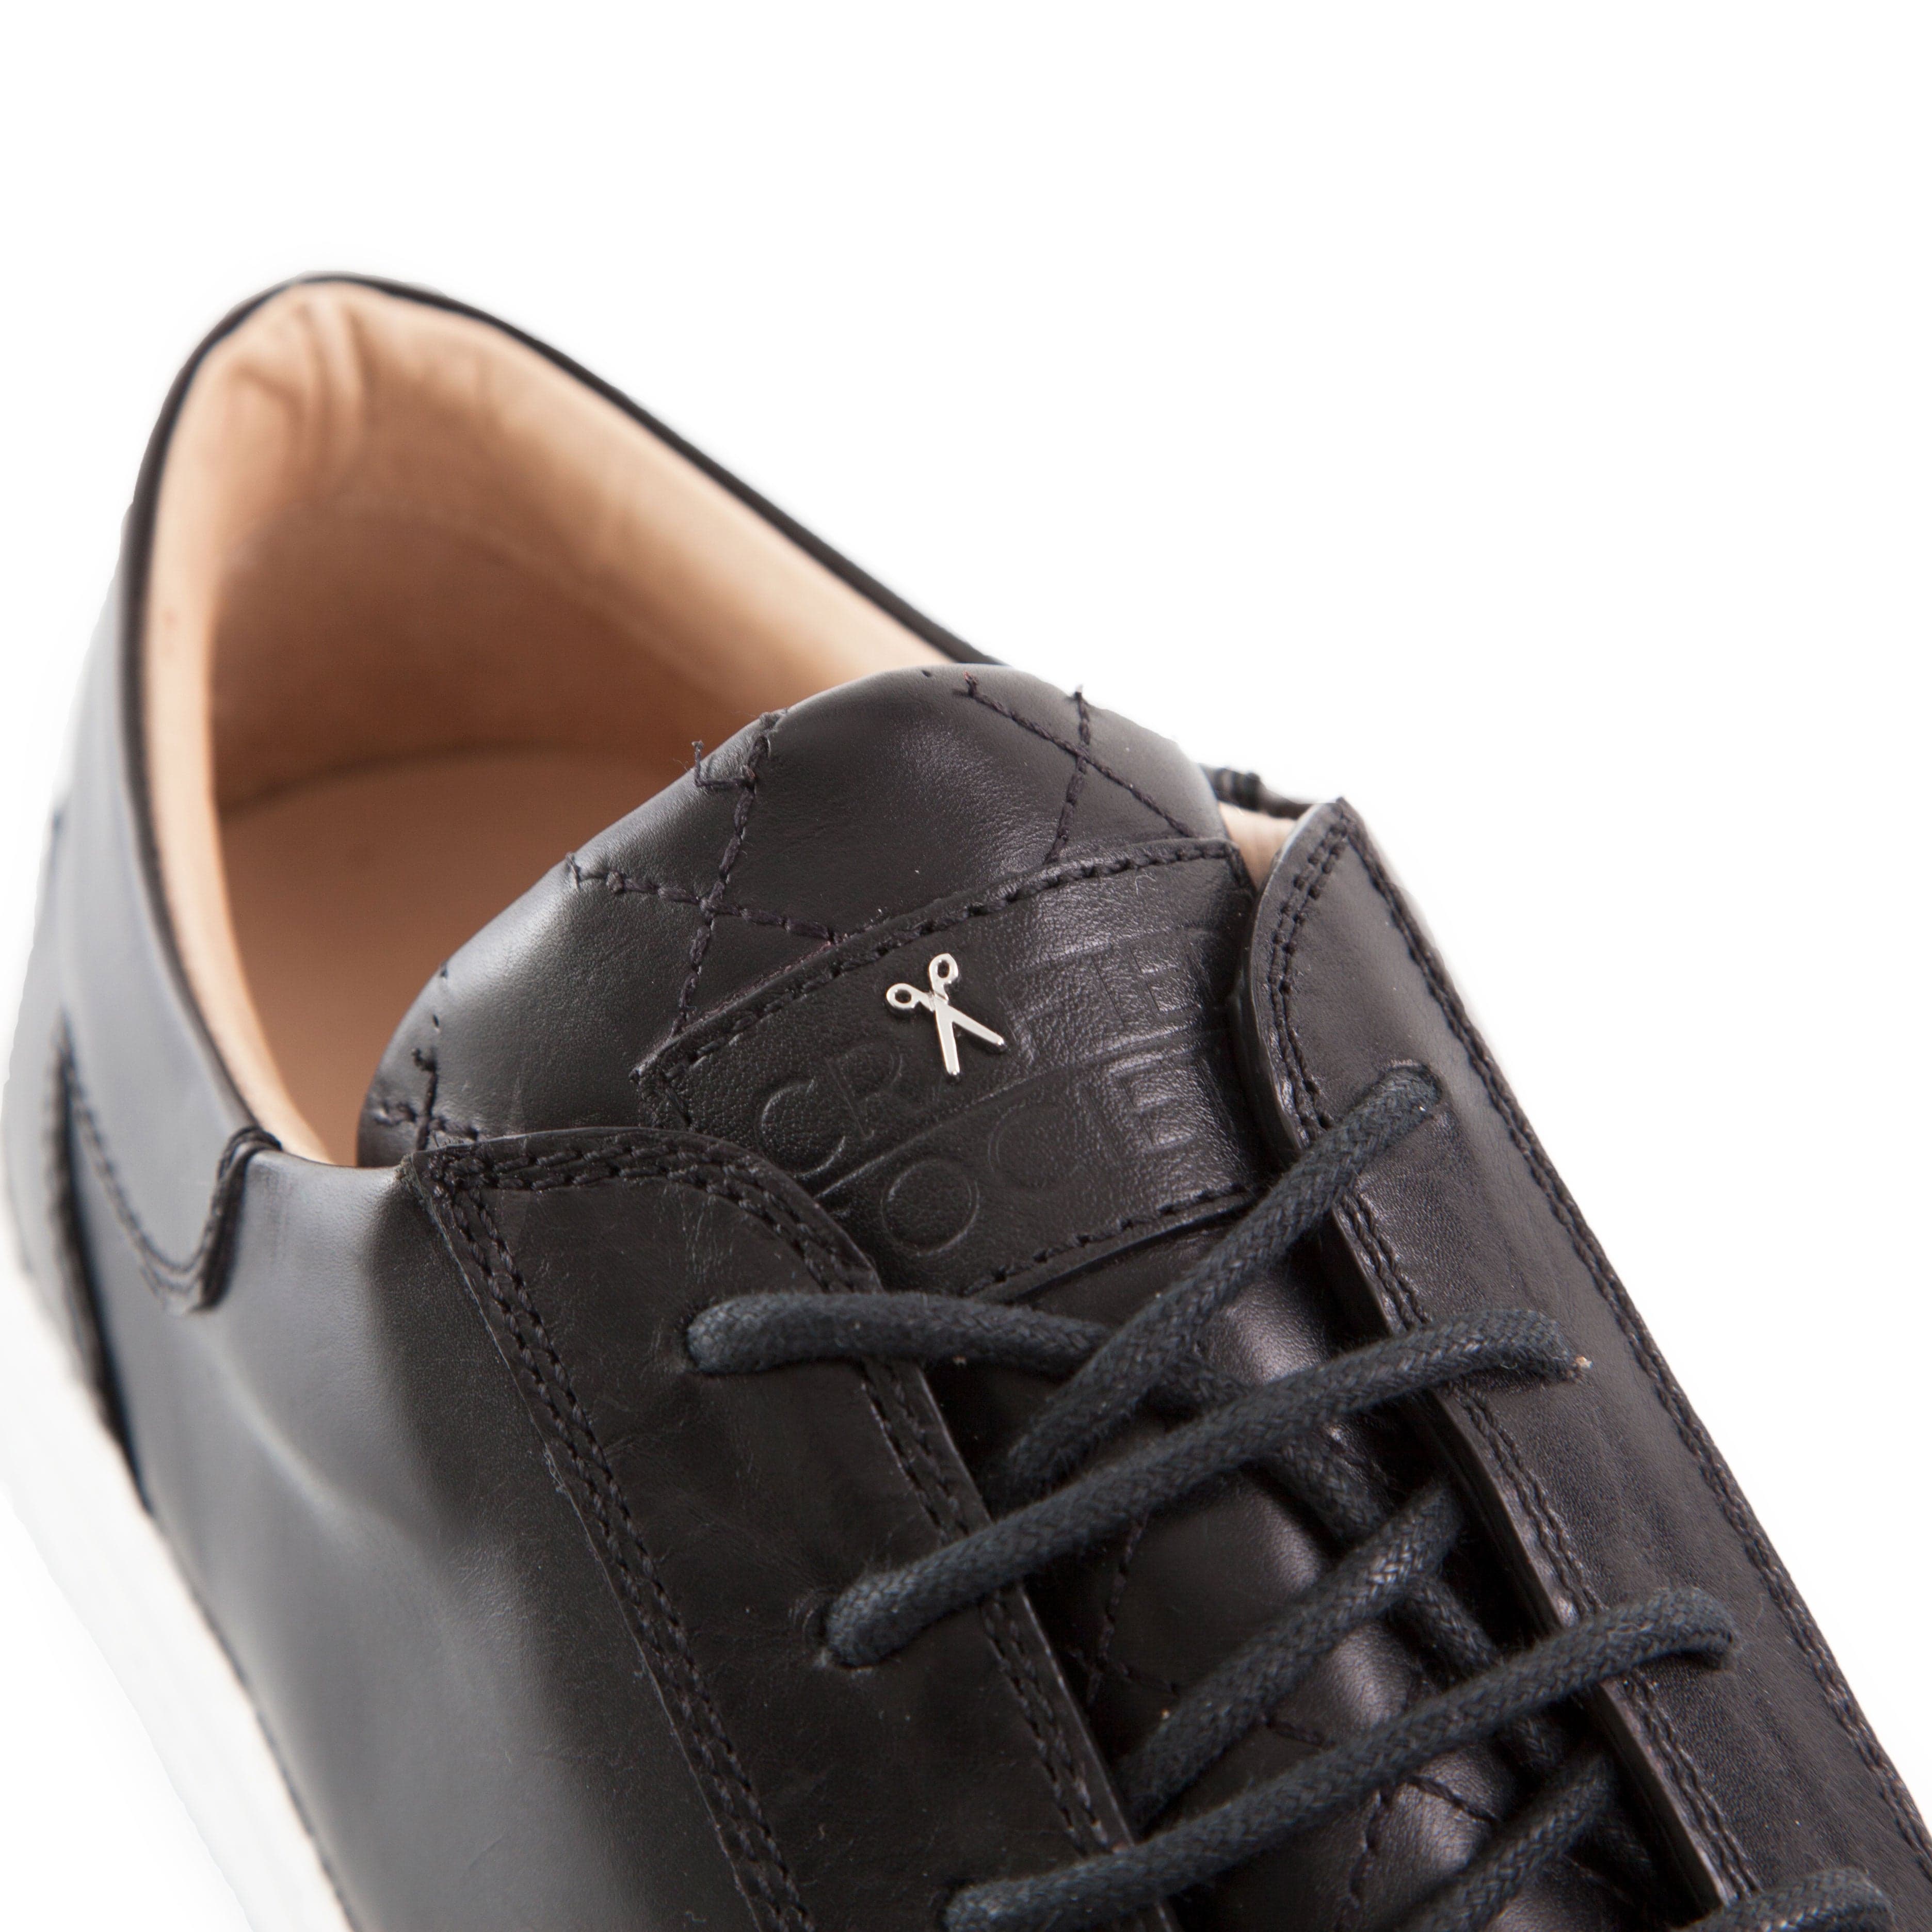 Mario Low Refined Sneaker | Black Full Grain Leather | White Outsole | Made in Italy | Sizes 39, 40, 41, 42 & 43